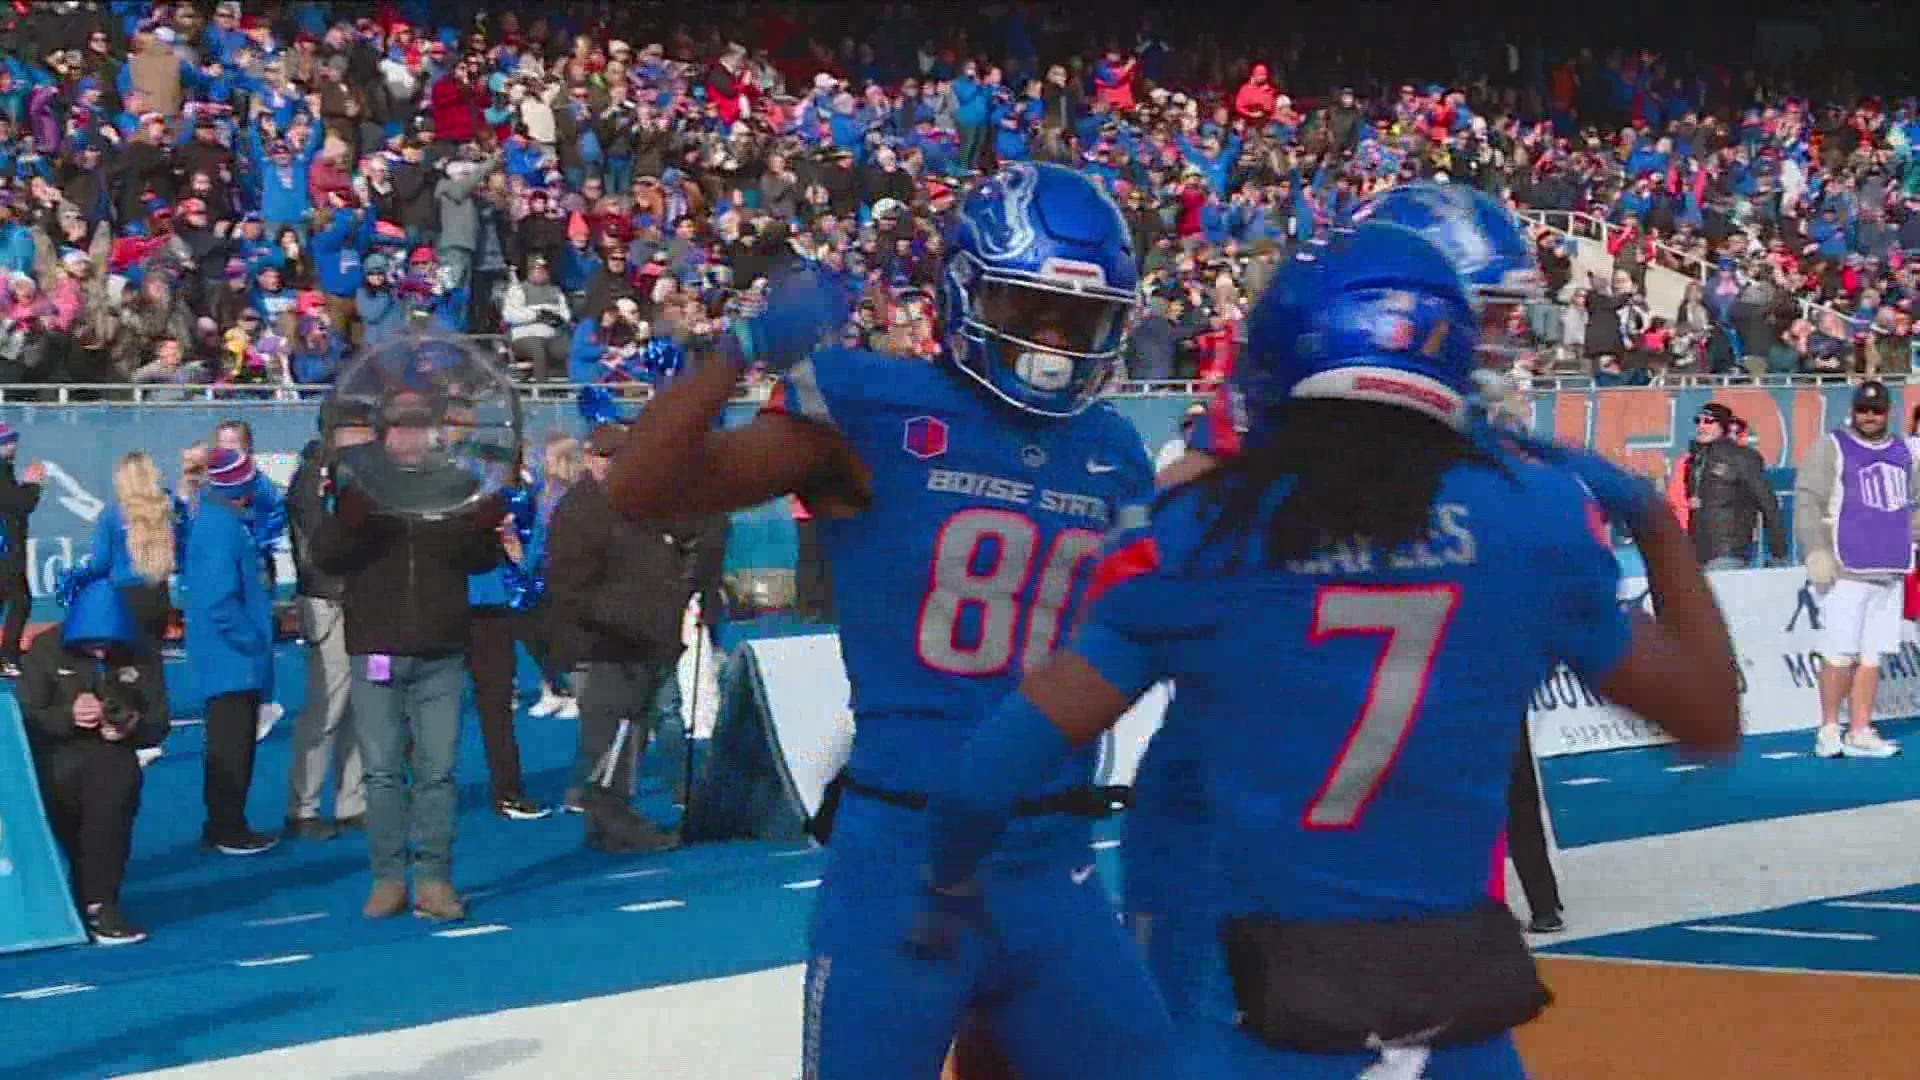 Boise State sent its seniors off in style on The Blue Friday, defeating Utah State 42-23. The Broncos finish the regular season 8-0 in Mountain West play.